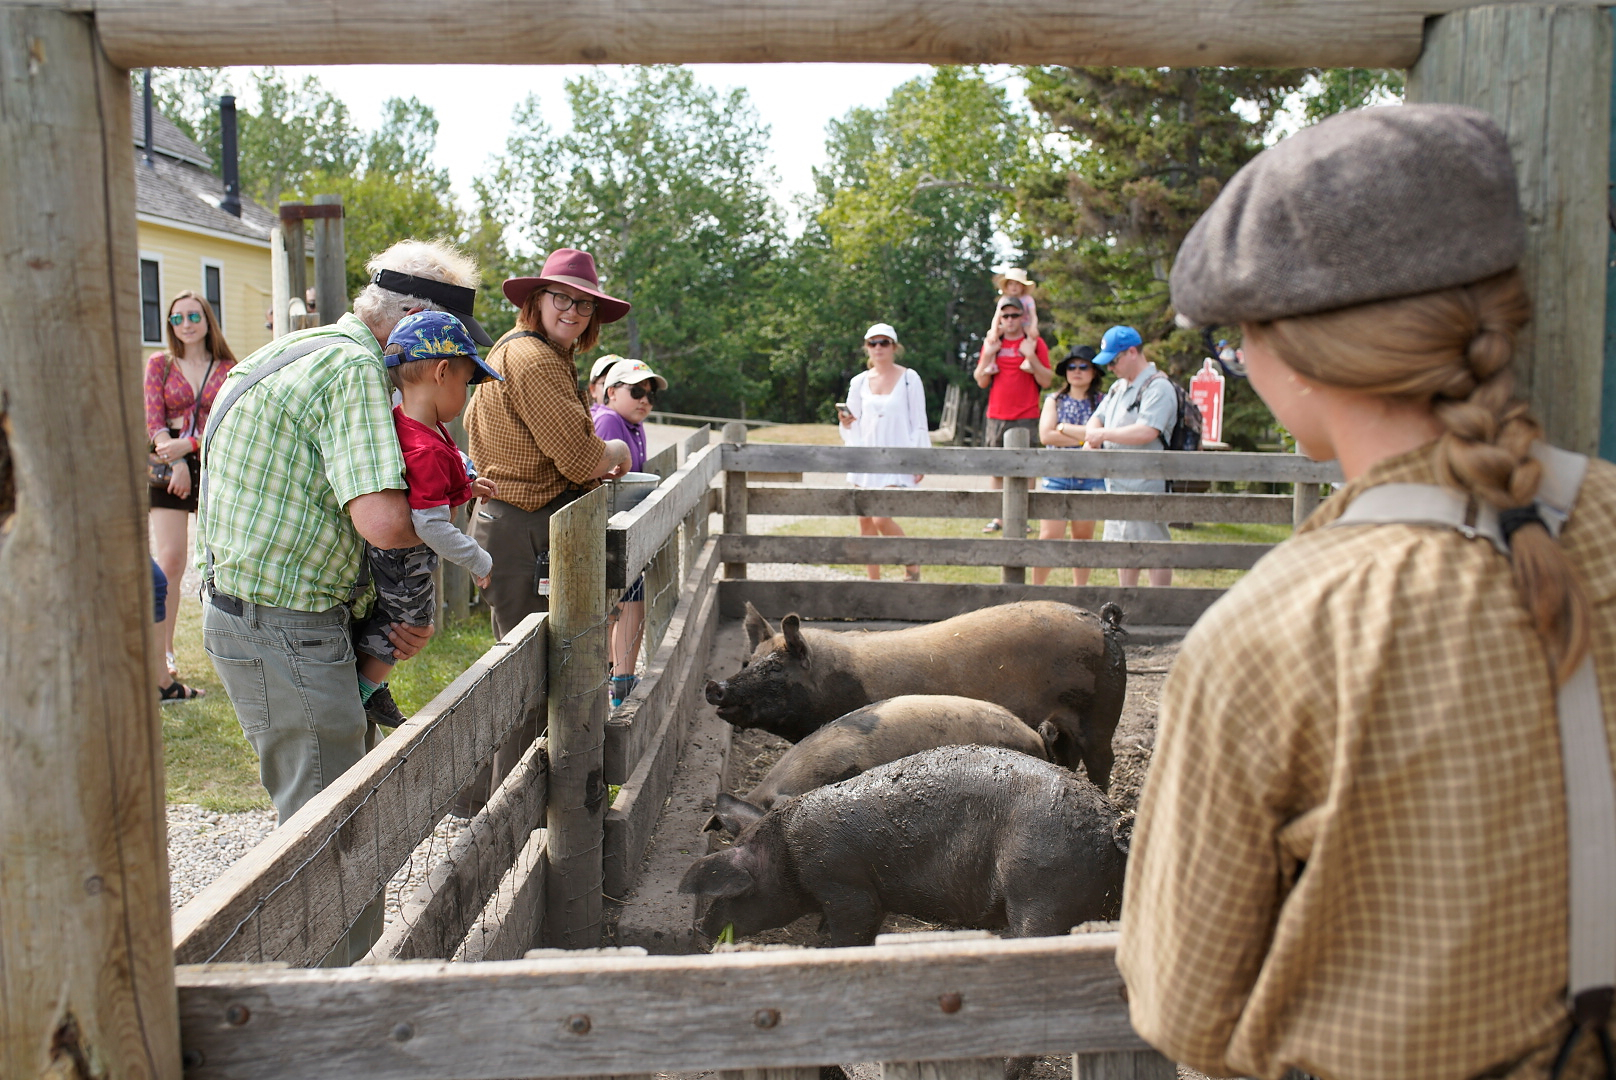 Guests visiting the Agriculture Area at Heritage Park